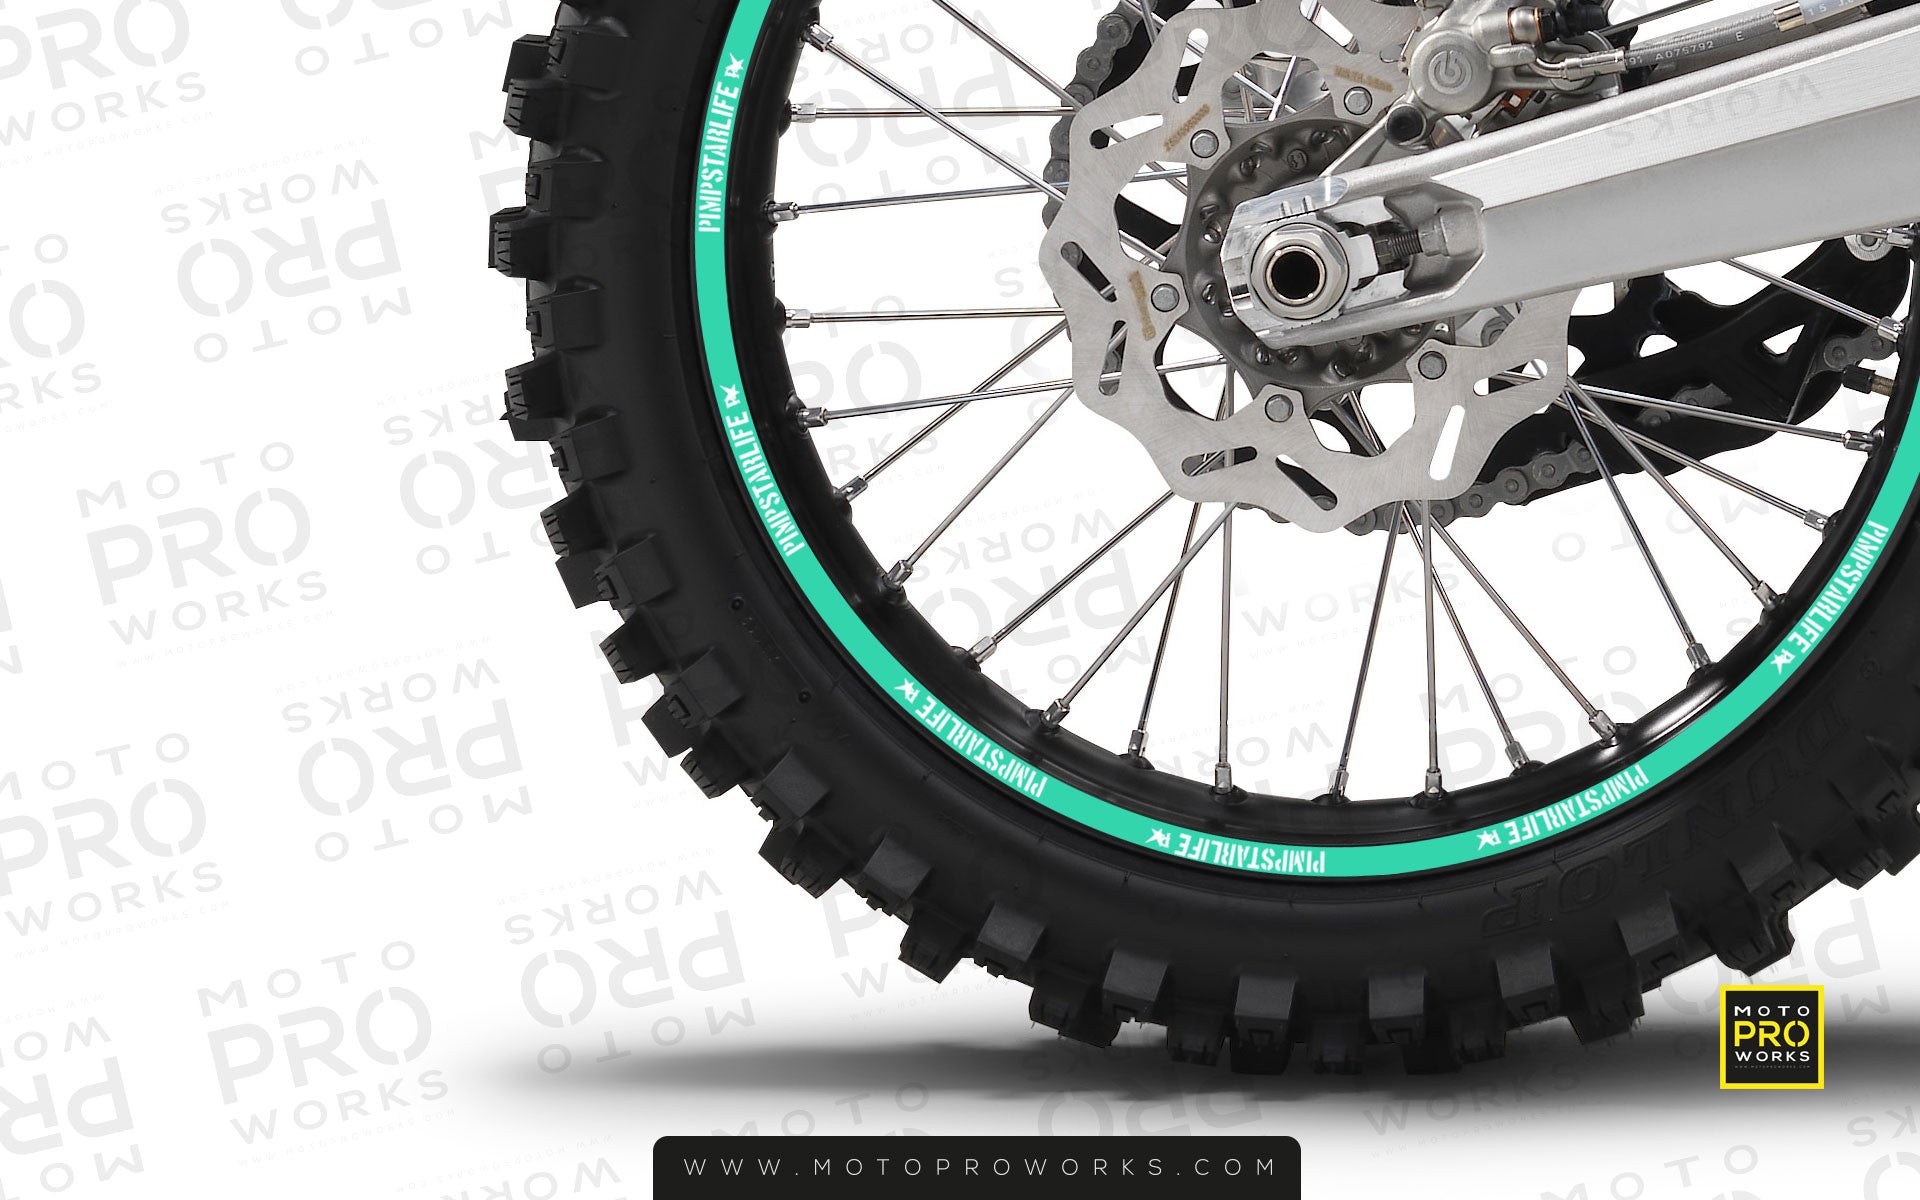 Rim Stripes - "SOLID" Pimpstar (turquoise) - MotoProWorks | Decals and Bike Graphic kit